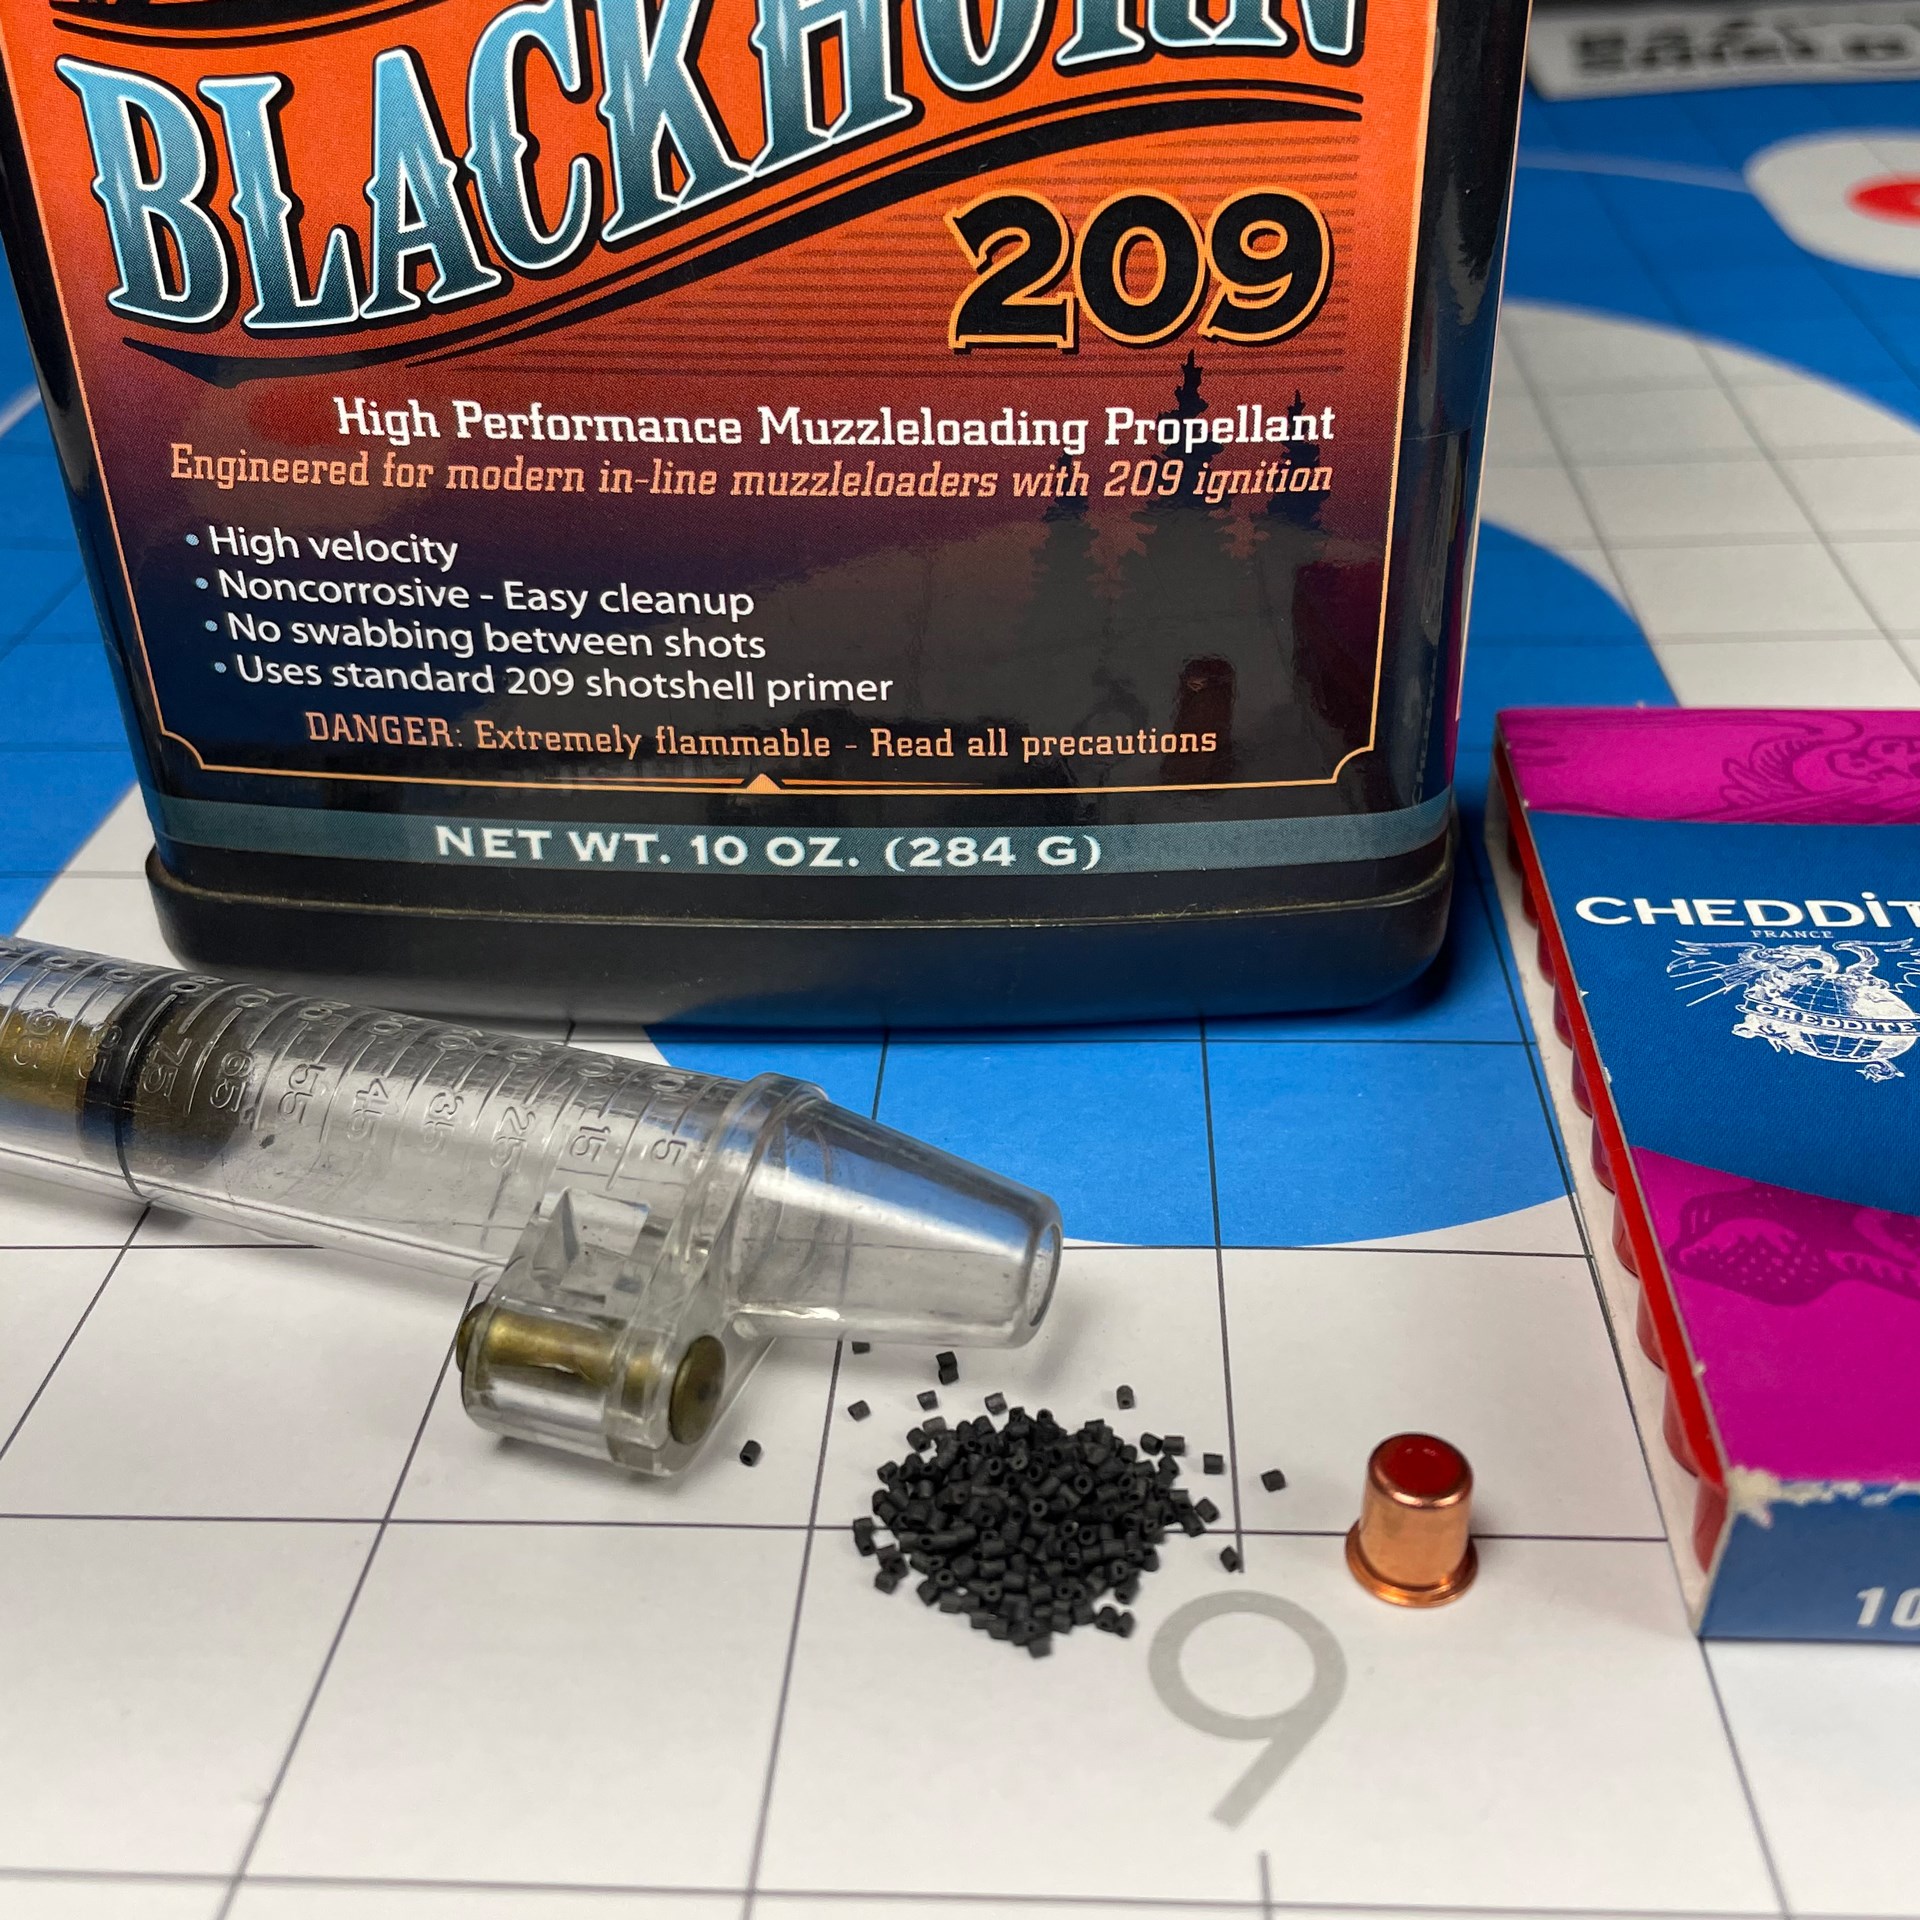 Blackhorn 209 muzzleloading propellant shown with measuring tool and primer